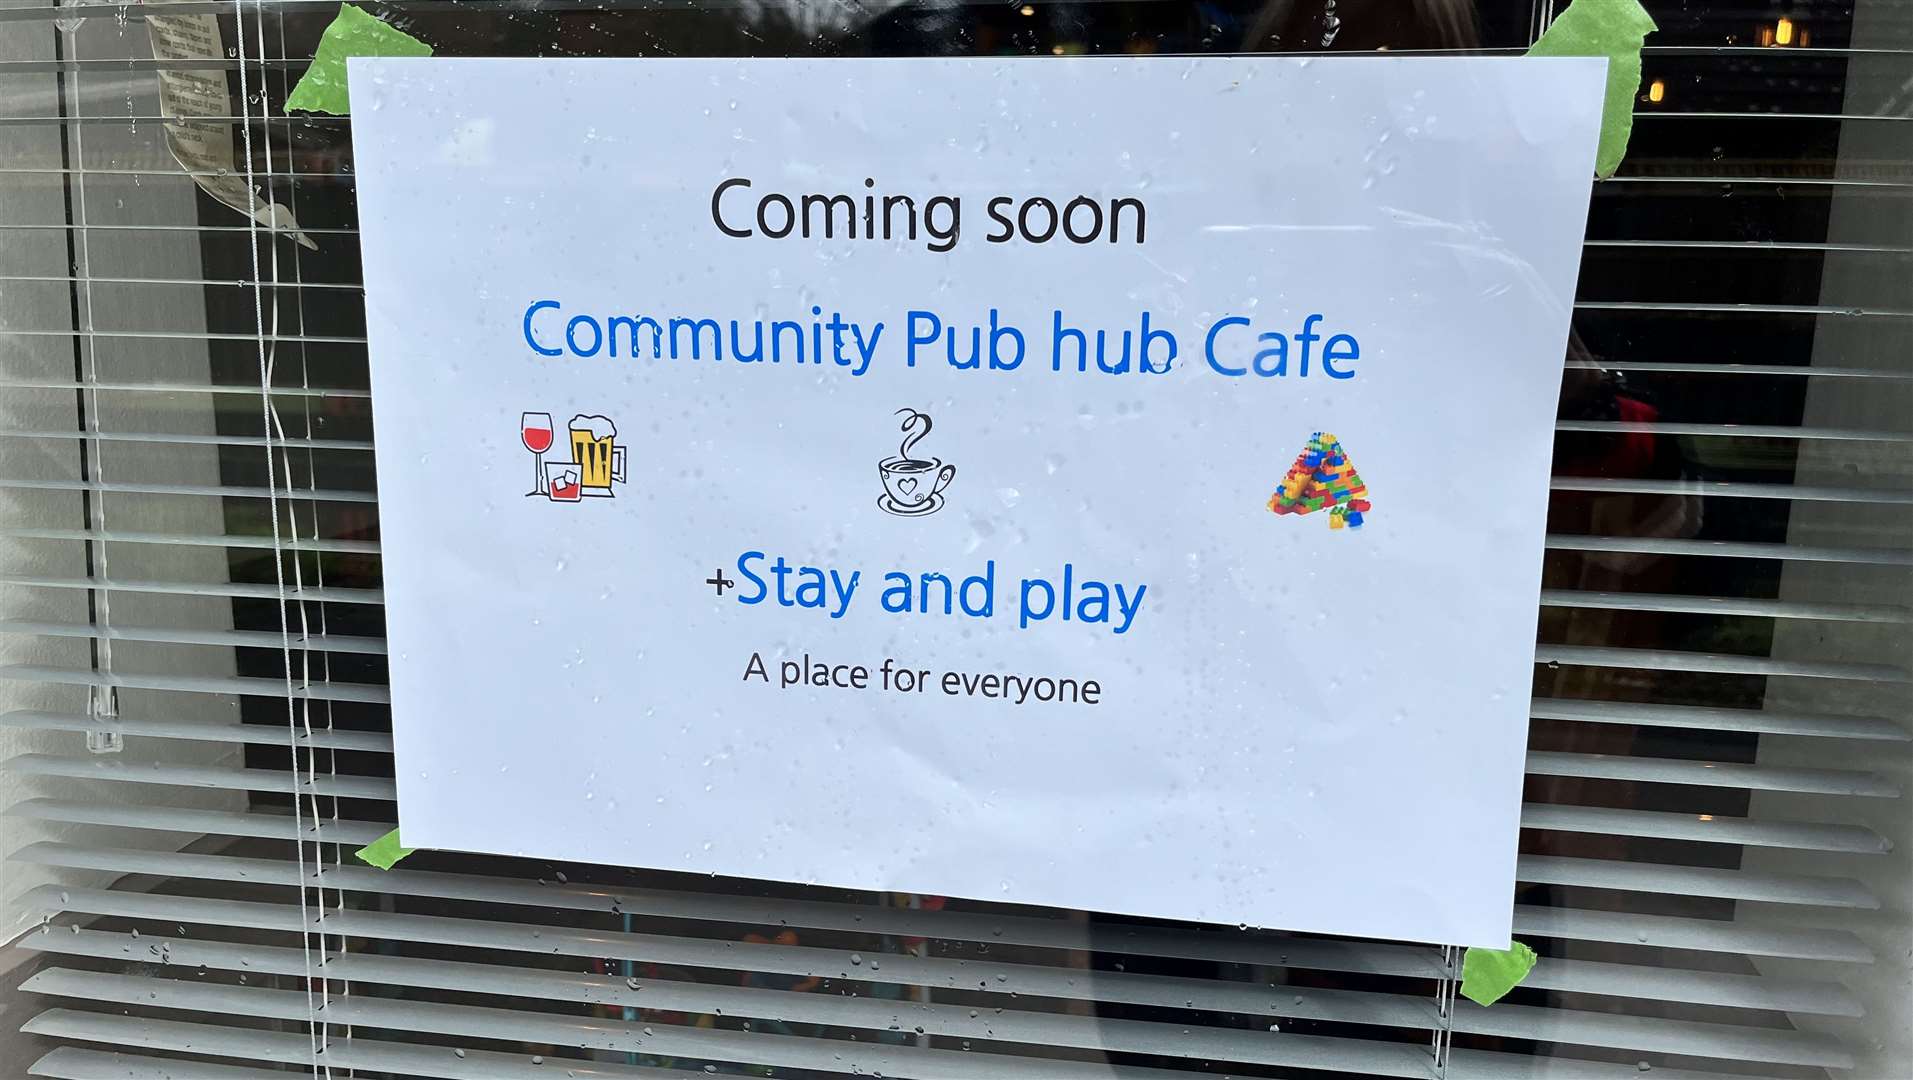 A Community Pub Hub Cafe is coming soon at Princes Park, in Princes Avenue, Chatham